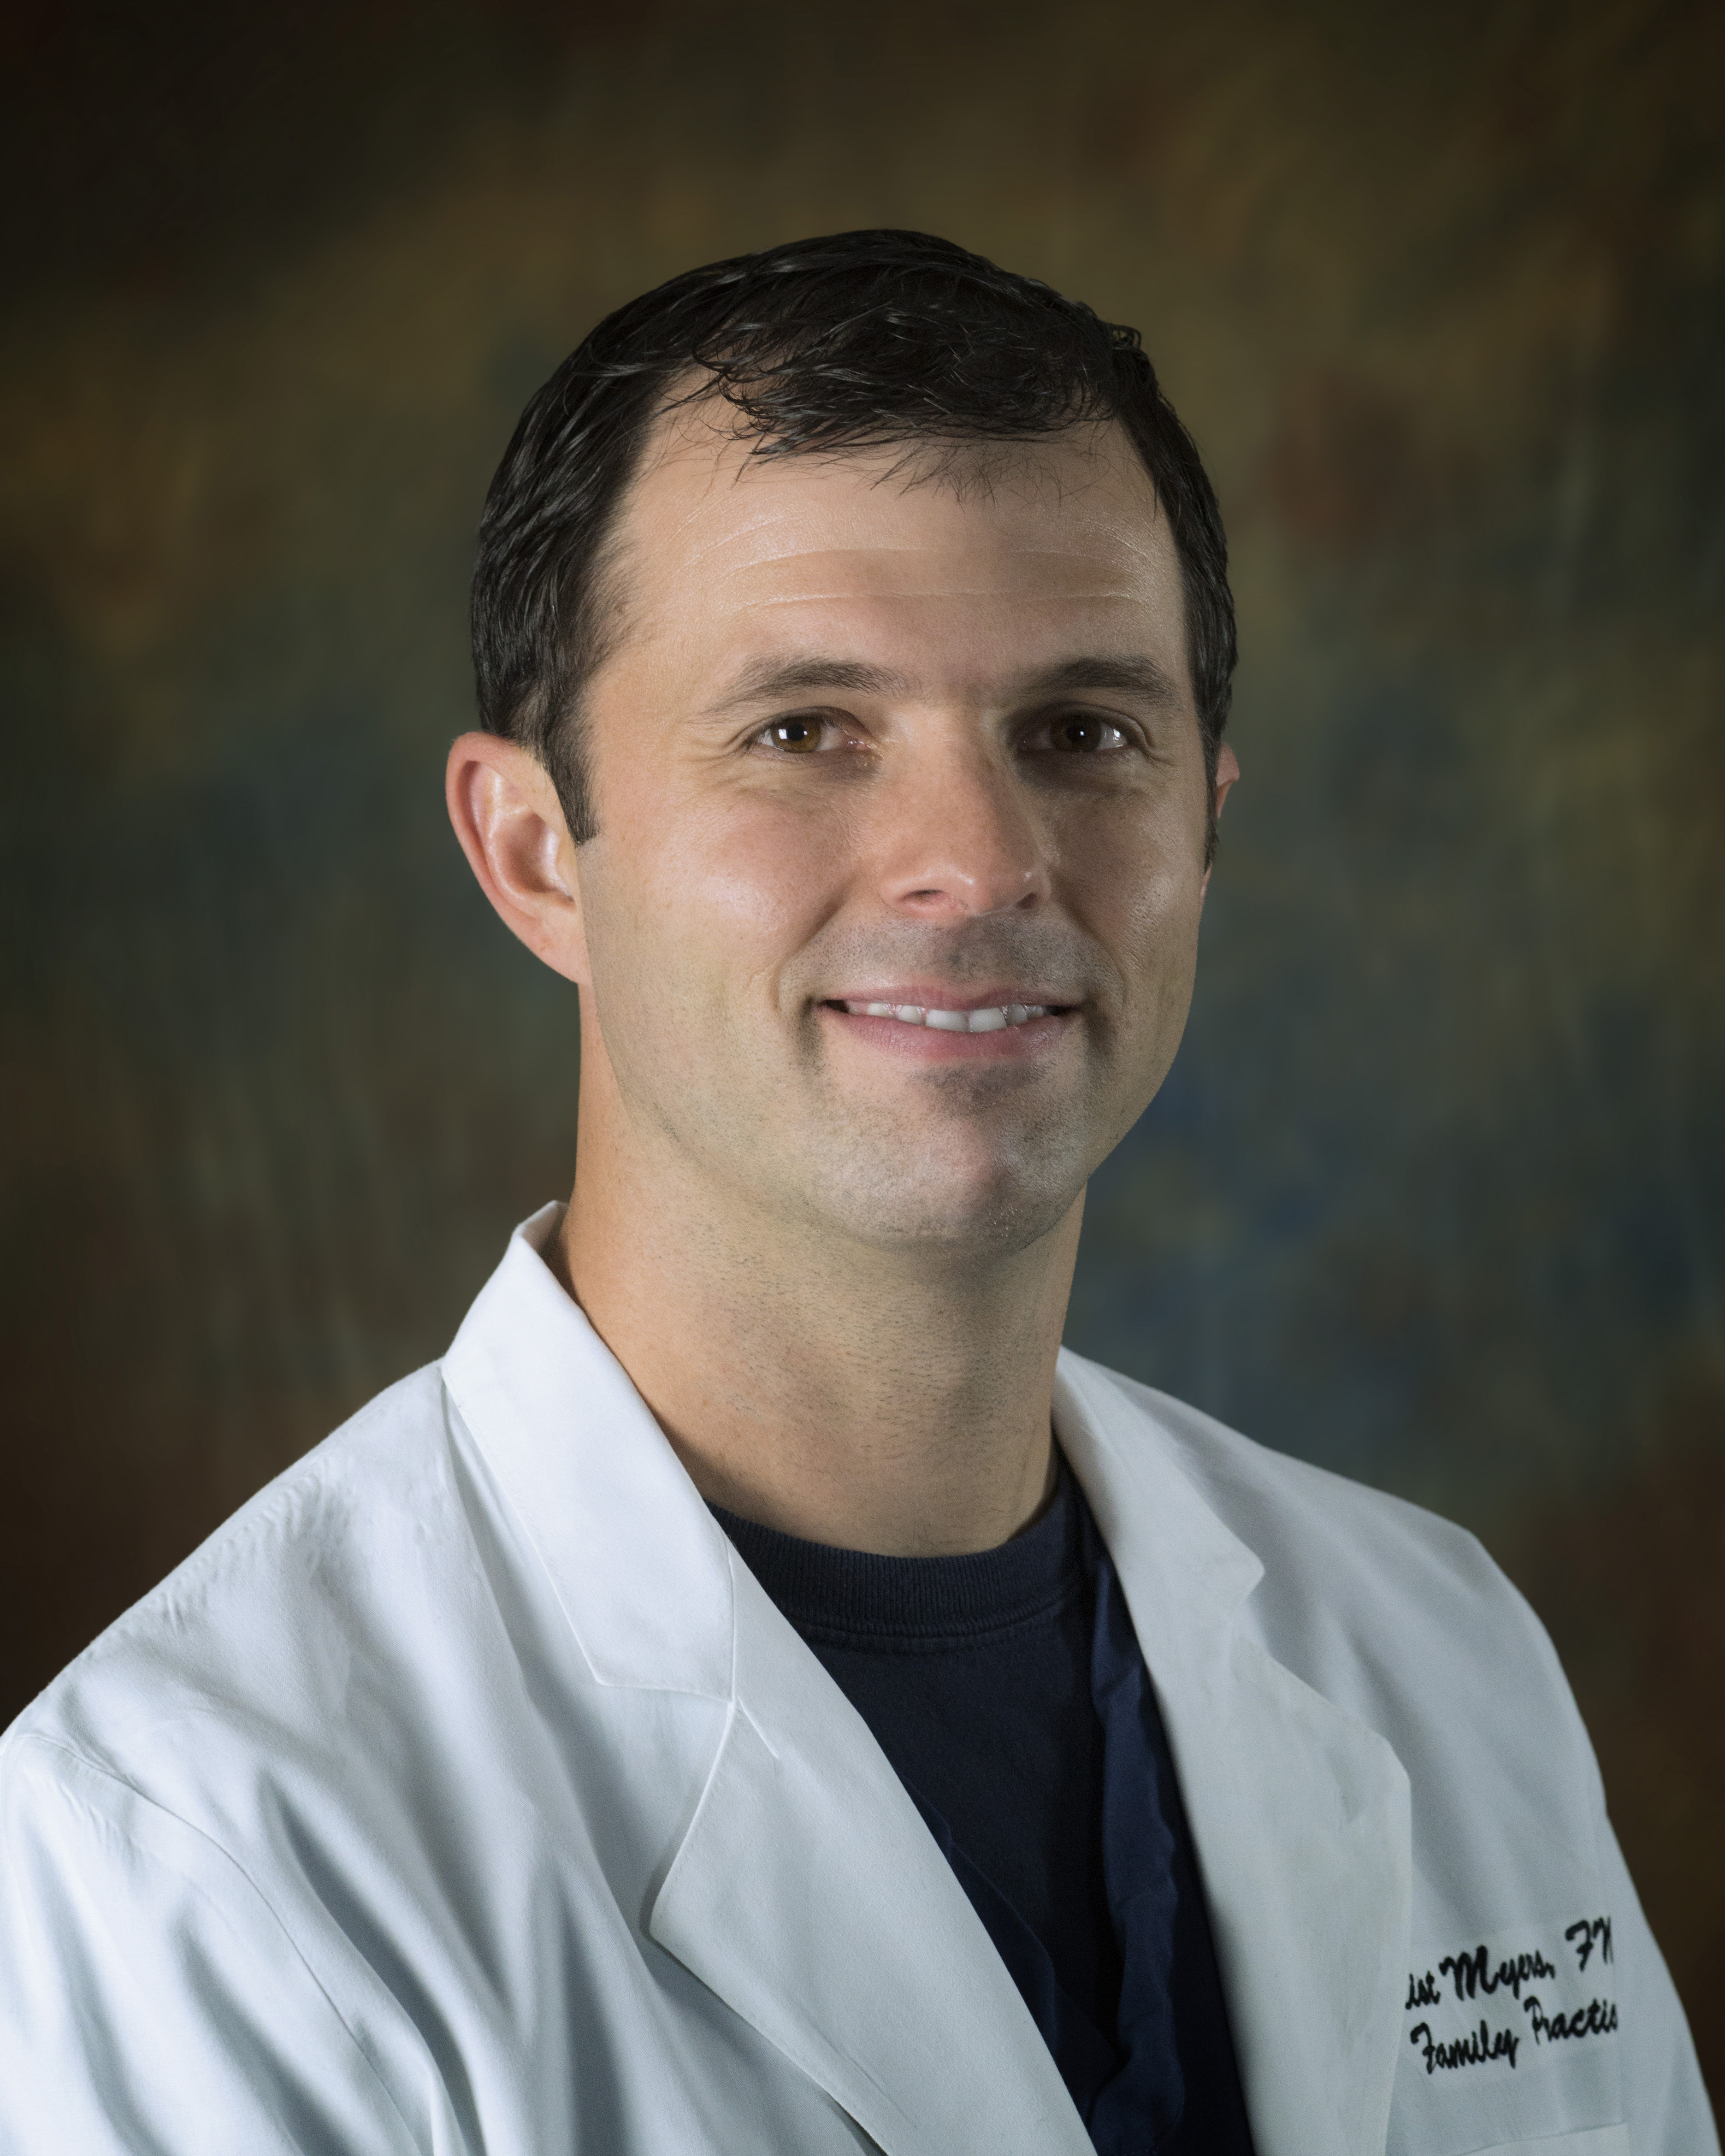 Elliot Myers is pictured in a white lab coat. Myers earned his bachelor's, master's, and doctorate in nursing from UL Lafayette.